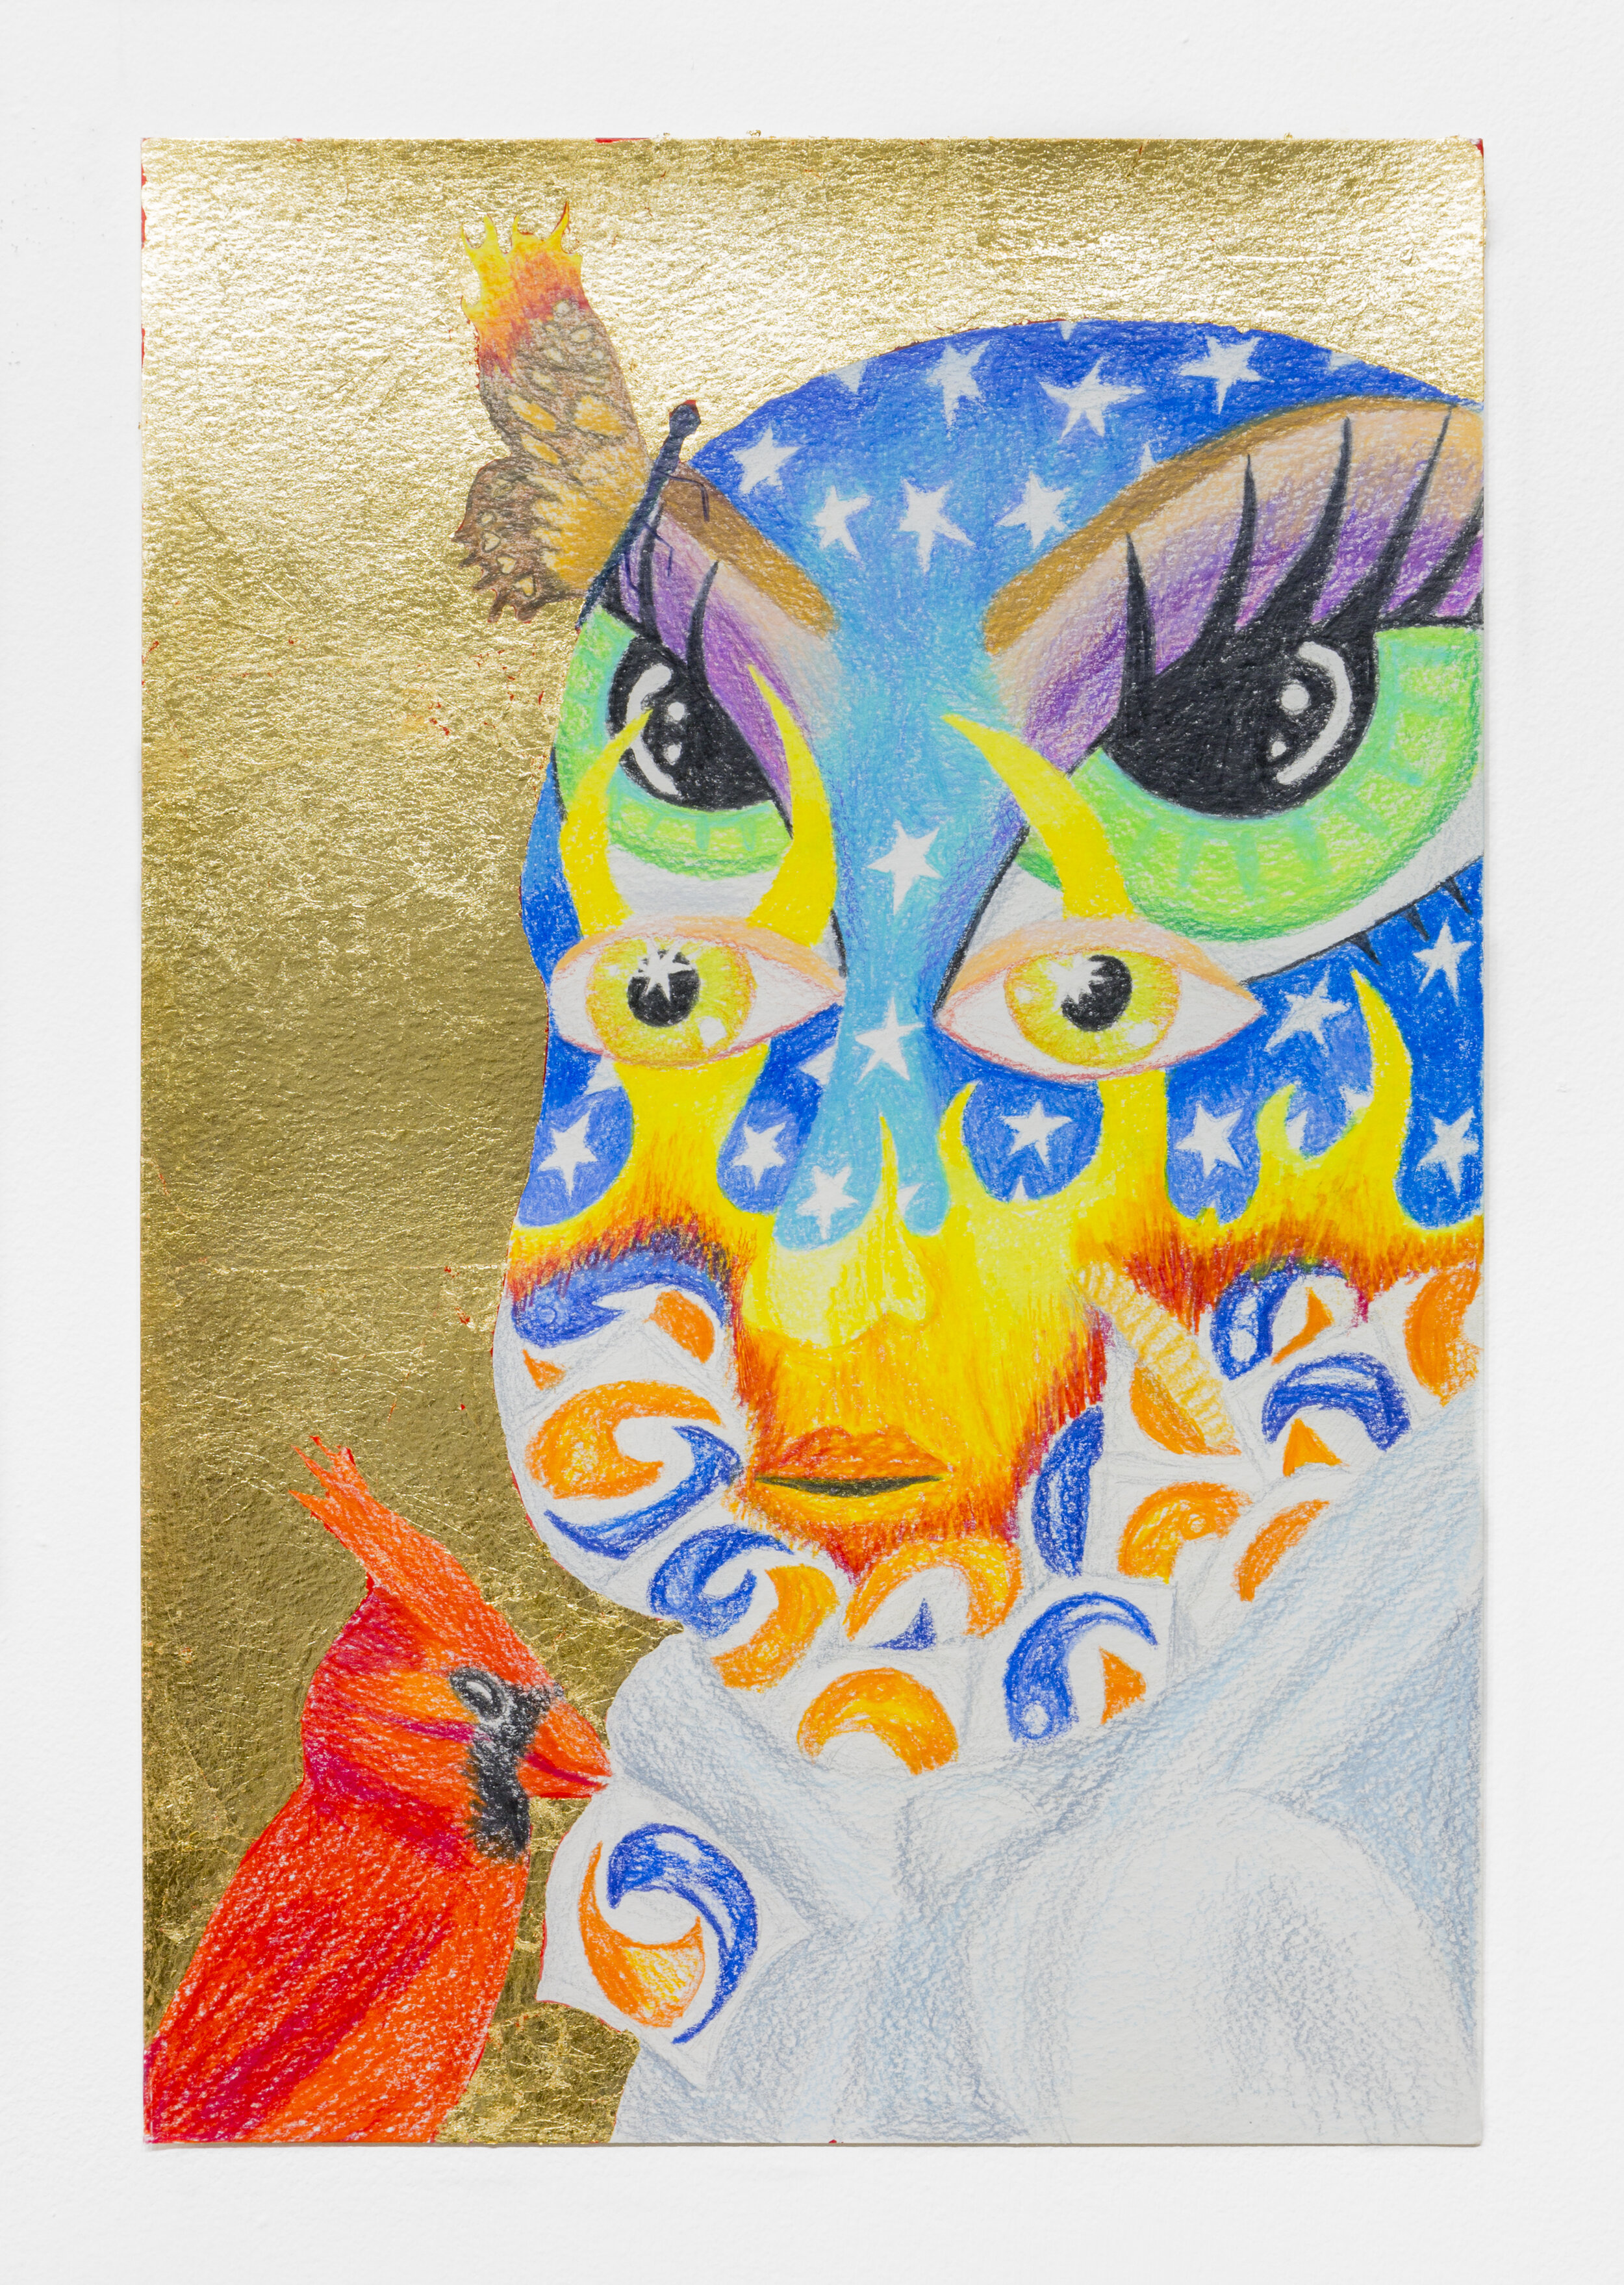   Tidepodphagia #3 (Baby with Painted Face),  2018  18 x 12 inches (45.72 x 30.48 cm.)  Colored pencil and gold leaf on paper 